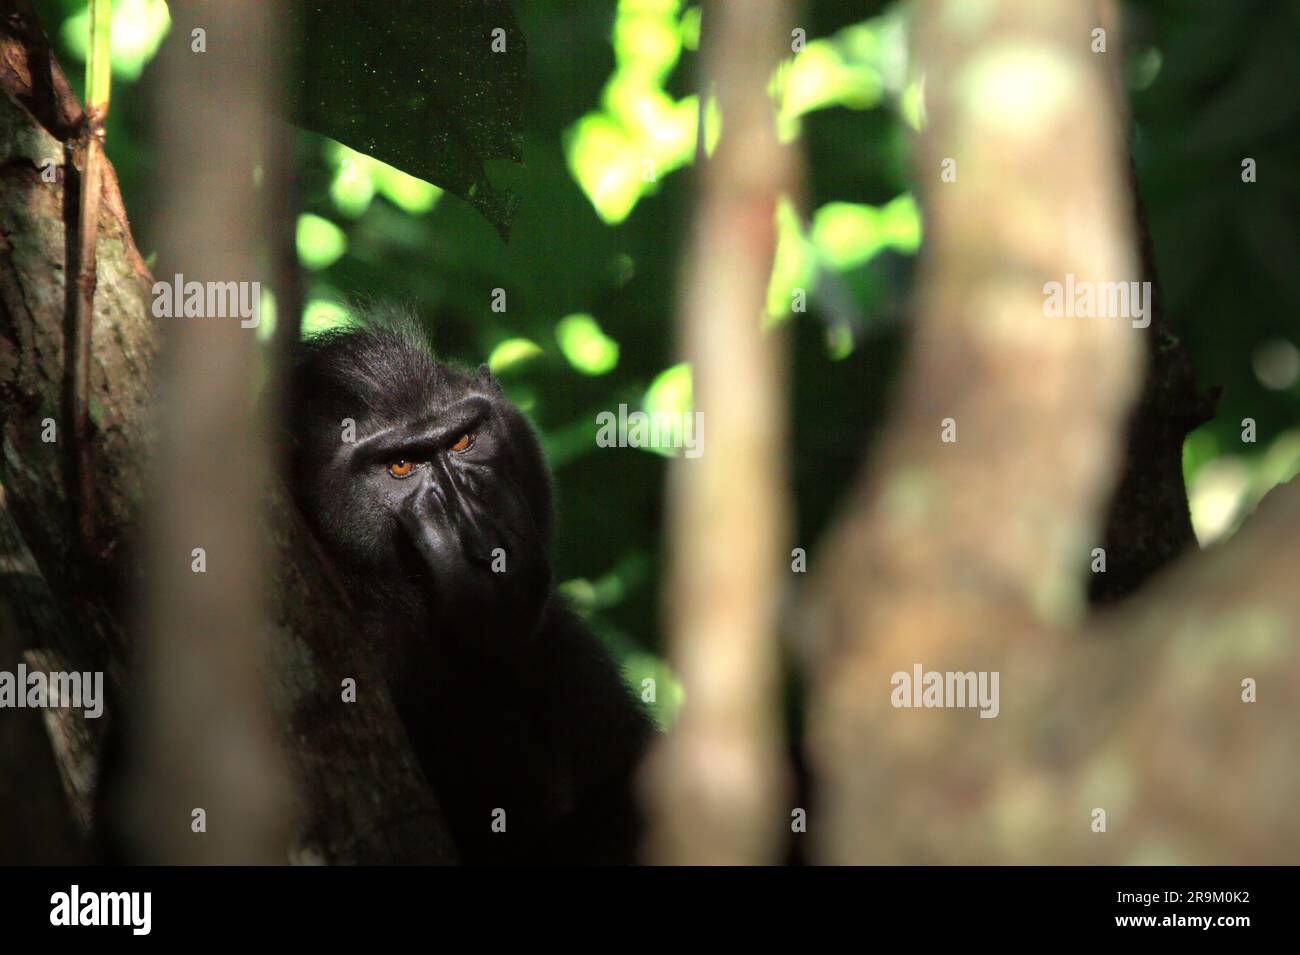 A Sulawesi black crested macaque (Macaca nigra) stares at camera as it is photographed from behind a tree in Tangkoko Nature Reserve in North Sulawesi, Indonesia. Climate change may gradually change behaviours and reproductive cycle of this threatened species, while at the same time reduce their habitat suitability, that could force them to move out of safe habitats and face potential conflicts with human, scientists say. Without the warming temperature, primates have already suffered from the escalating anthropogenic pressures, causing them to have declining population and extinction risk. Stock Photo